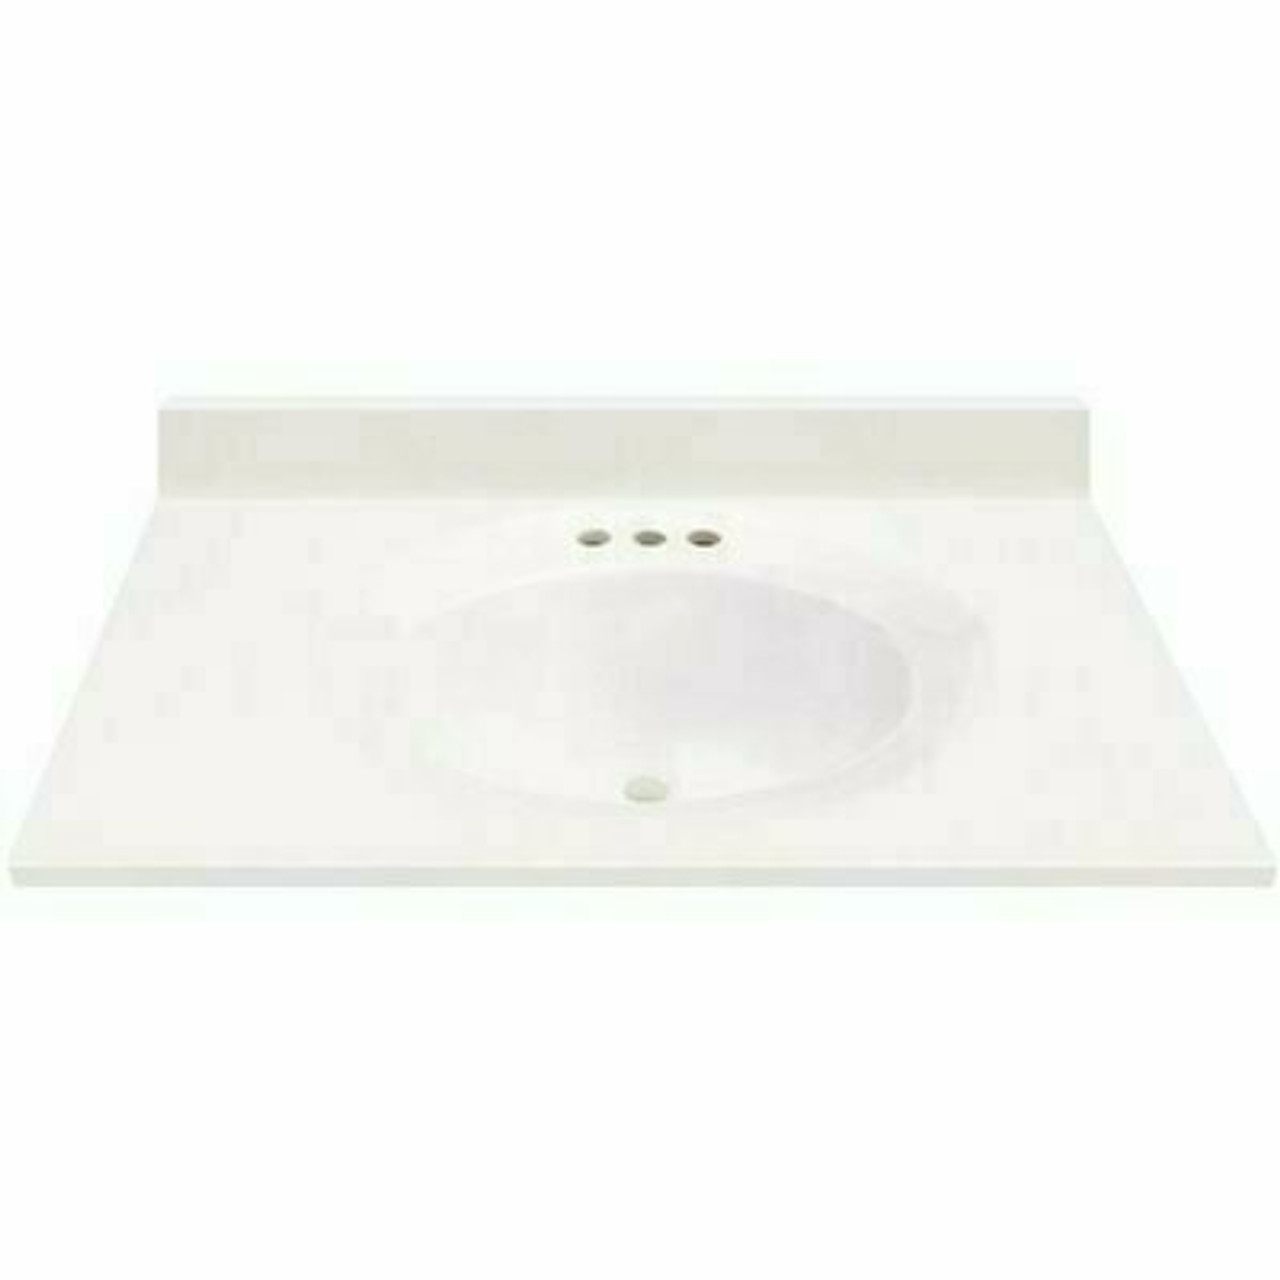 Magickwoods 37 In. W X 22 In. D Cultured Marble Oval Recessed Single Basin Vanity Top In White With White Basin